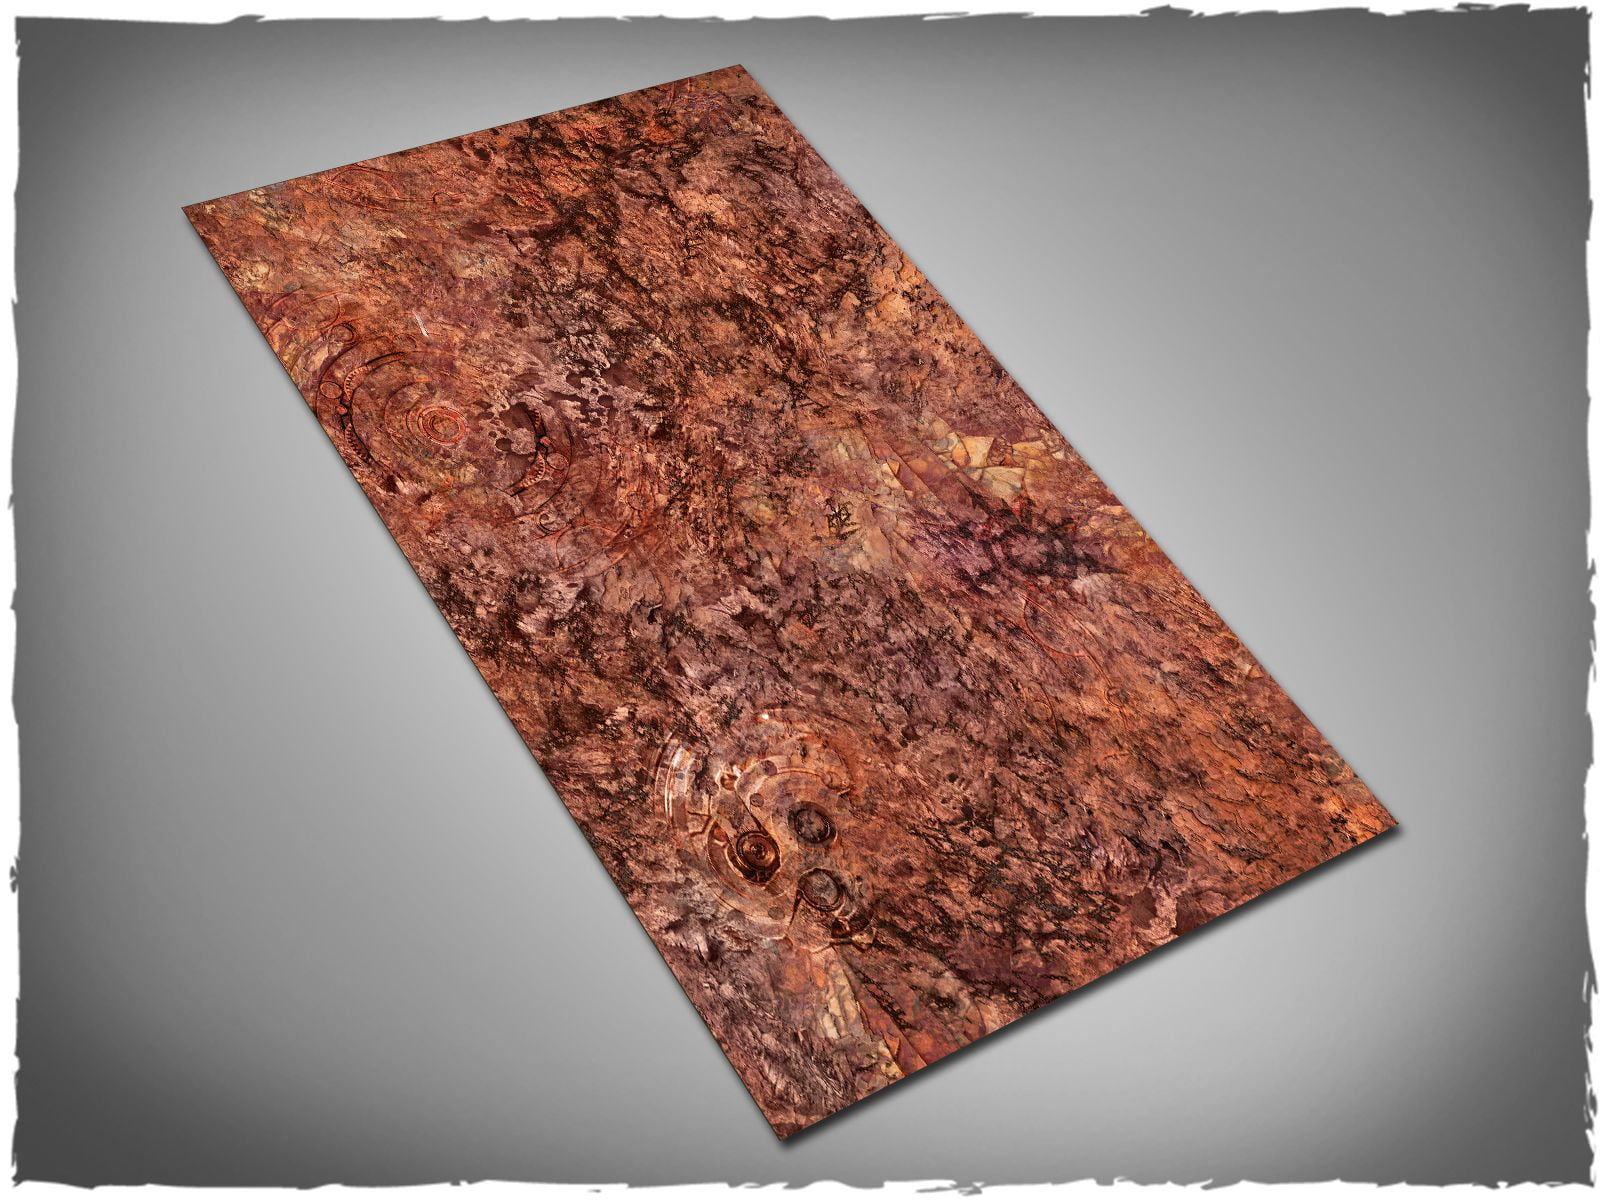 44in x 30in, Realm of Chaos Themed Mousepad Games Mat